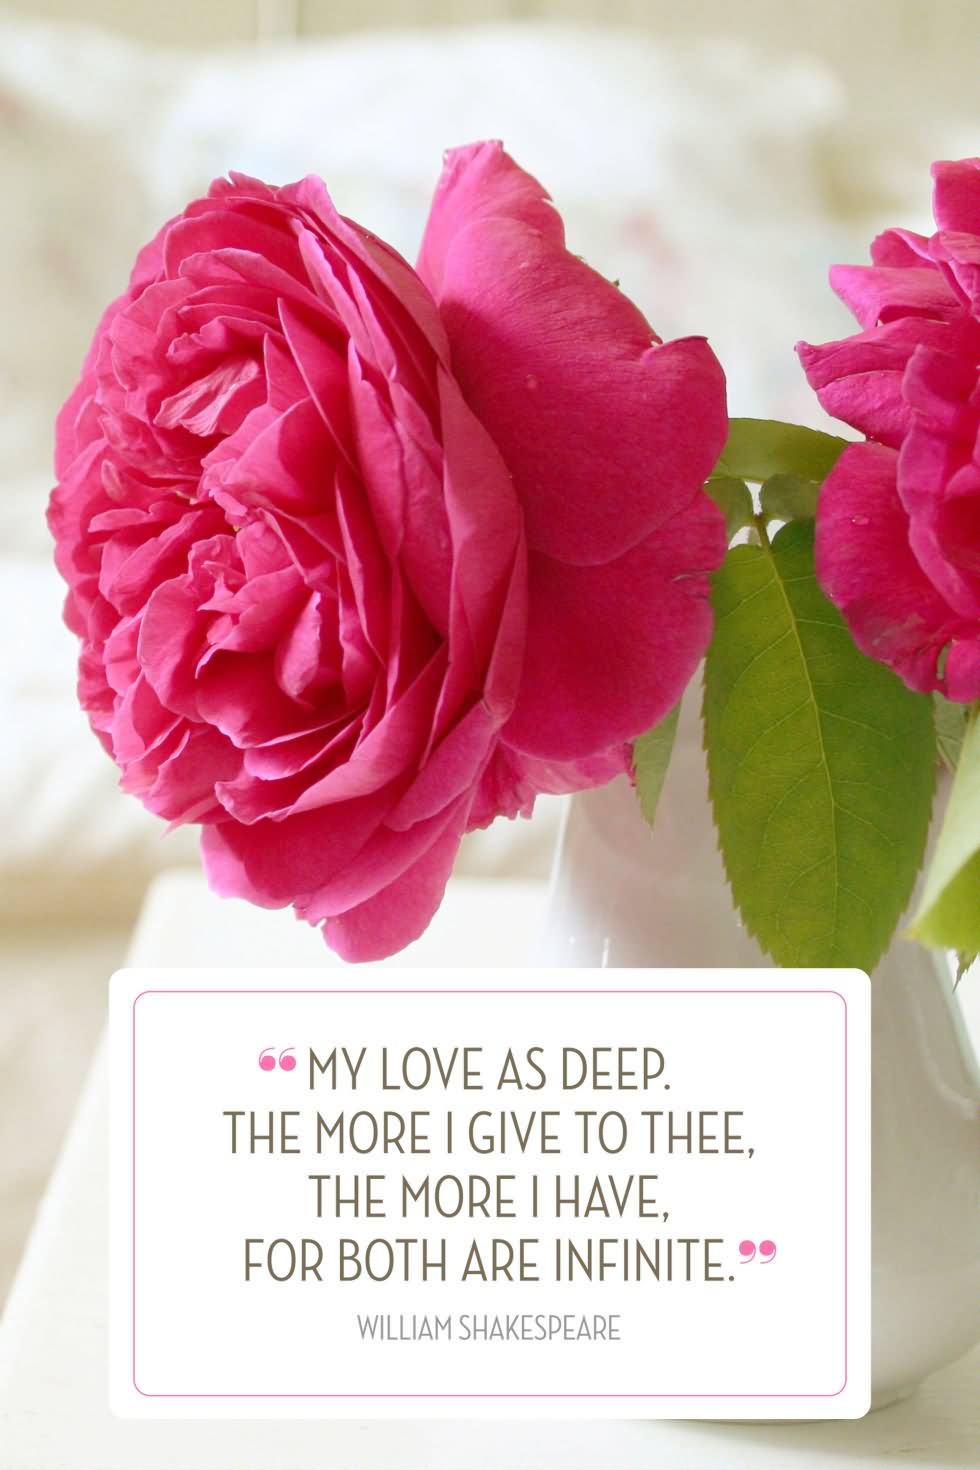 My love is deep.the more i give to thee, the more i have,for both are infinite. William Shakespeare.